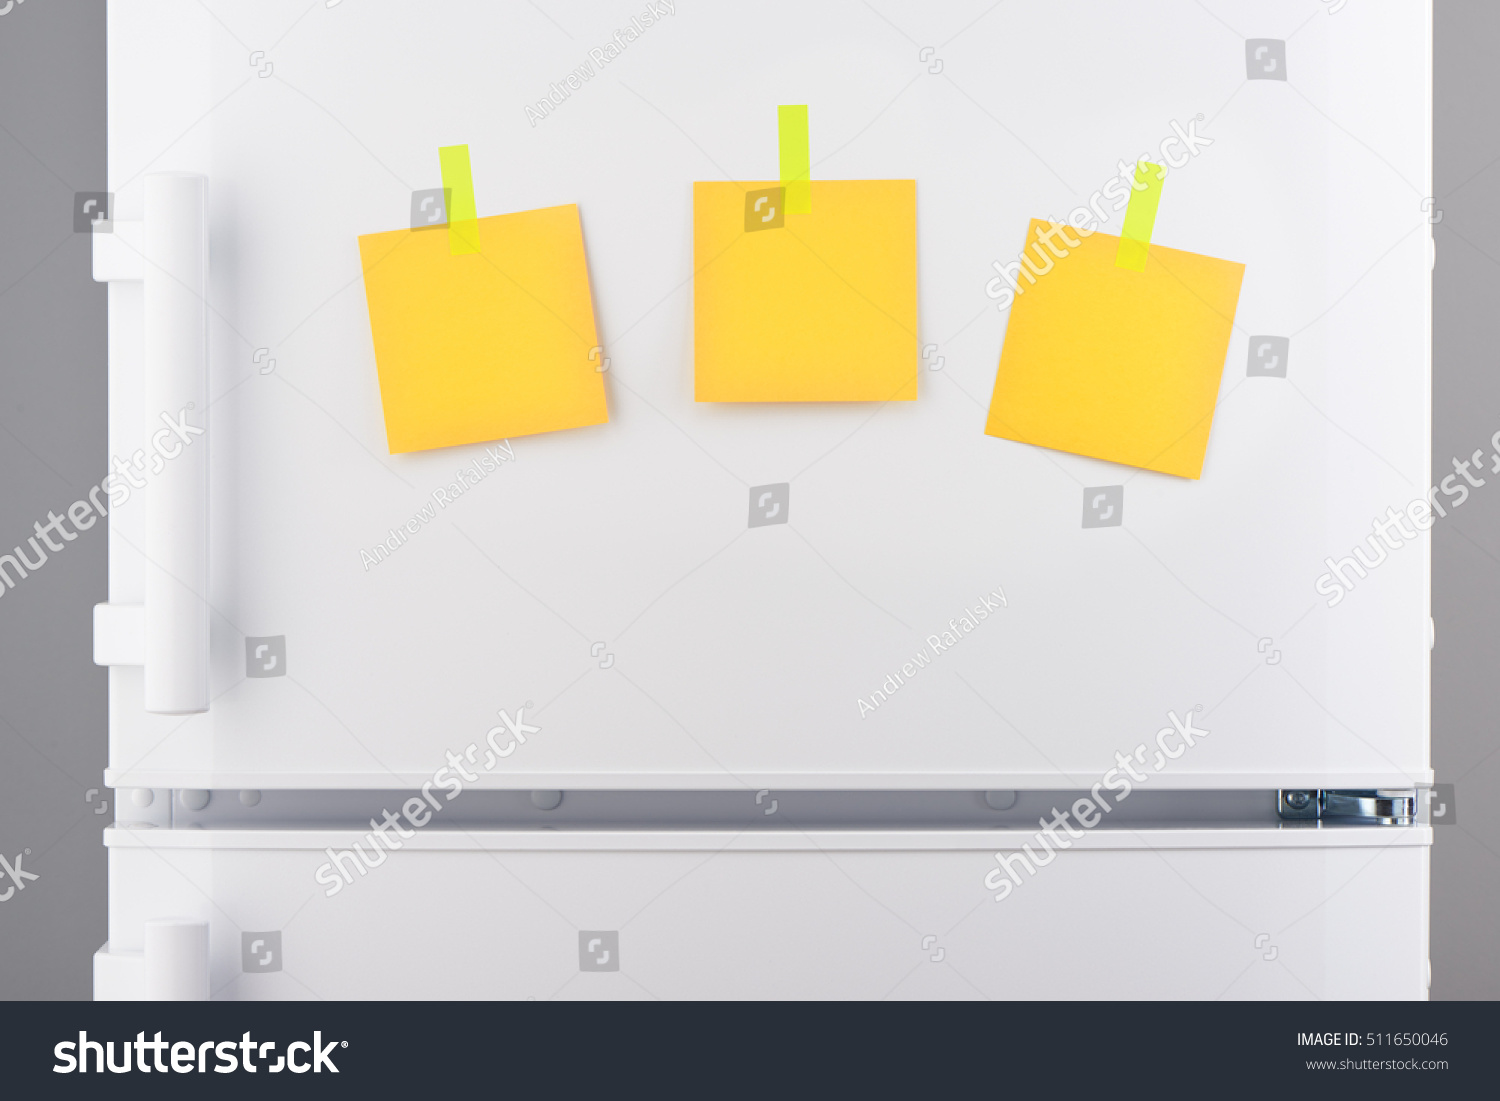 Three blank yellow paper notes attached with yellow stickers on white refrigerator door #511650046